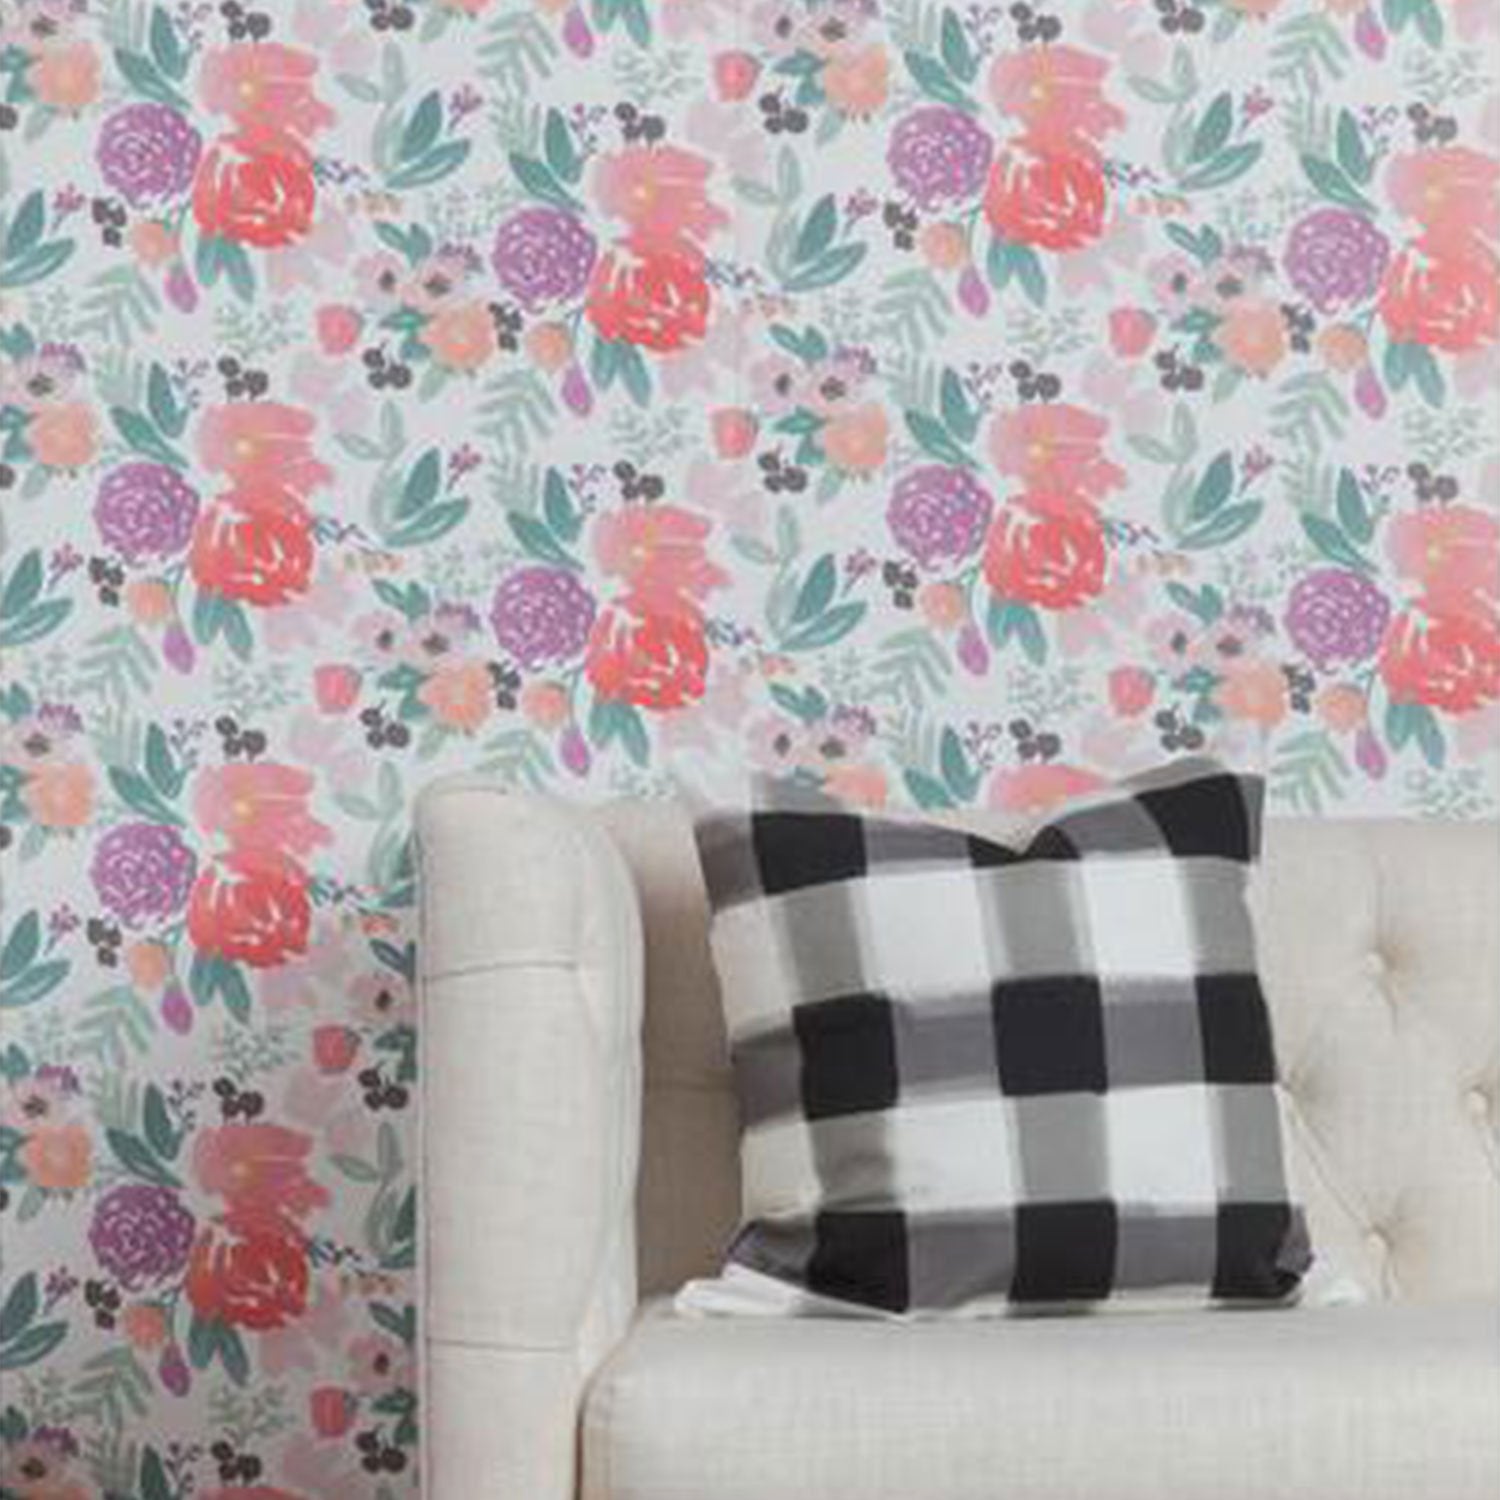 Blooms Petite in White Watercolor Floral Wallpaper in Room